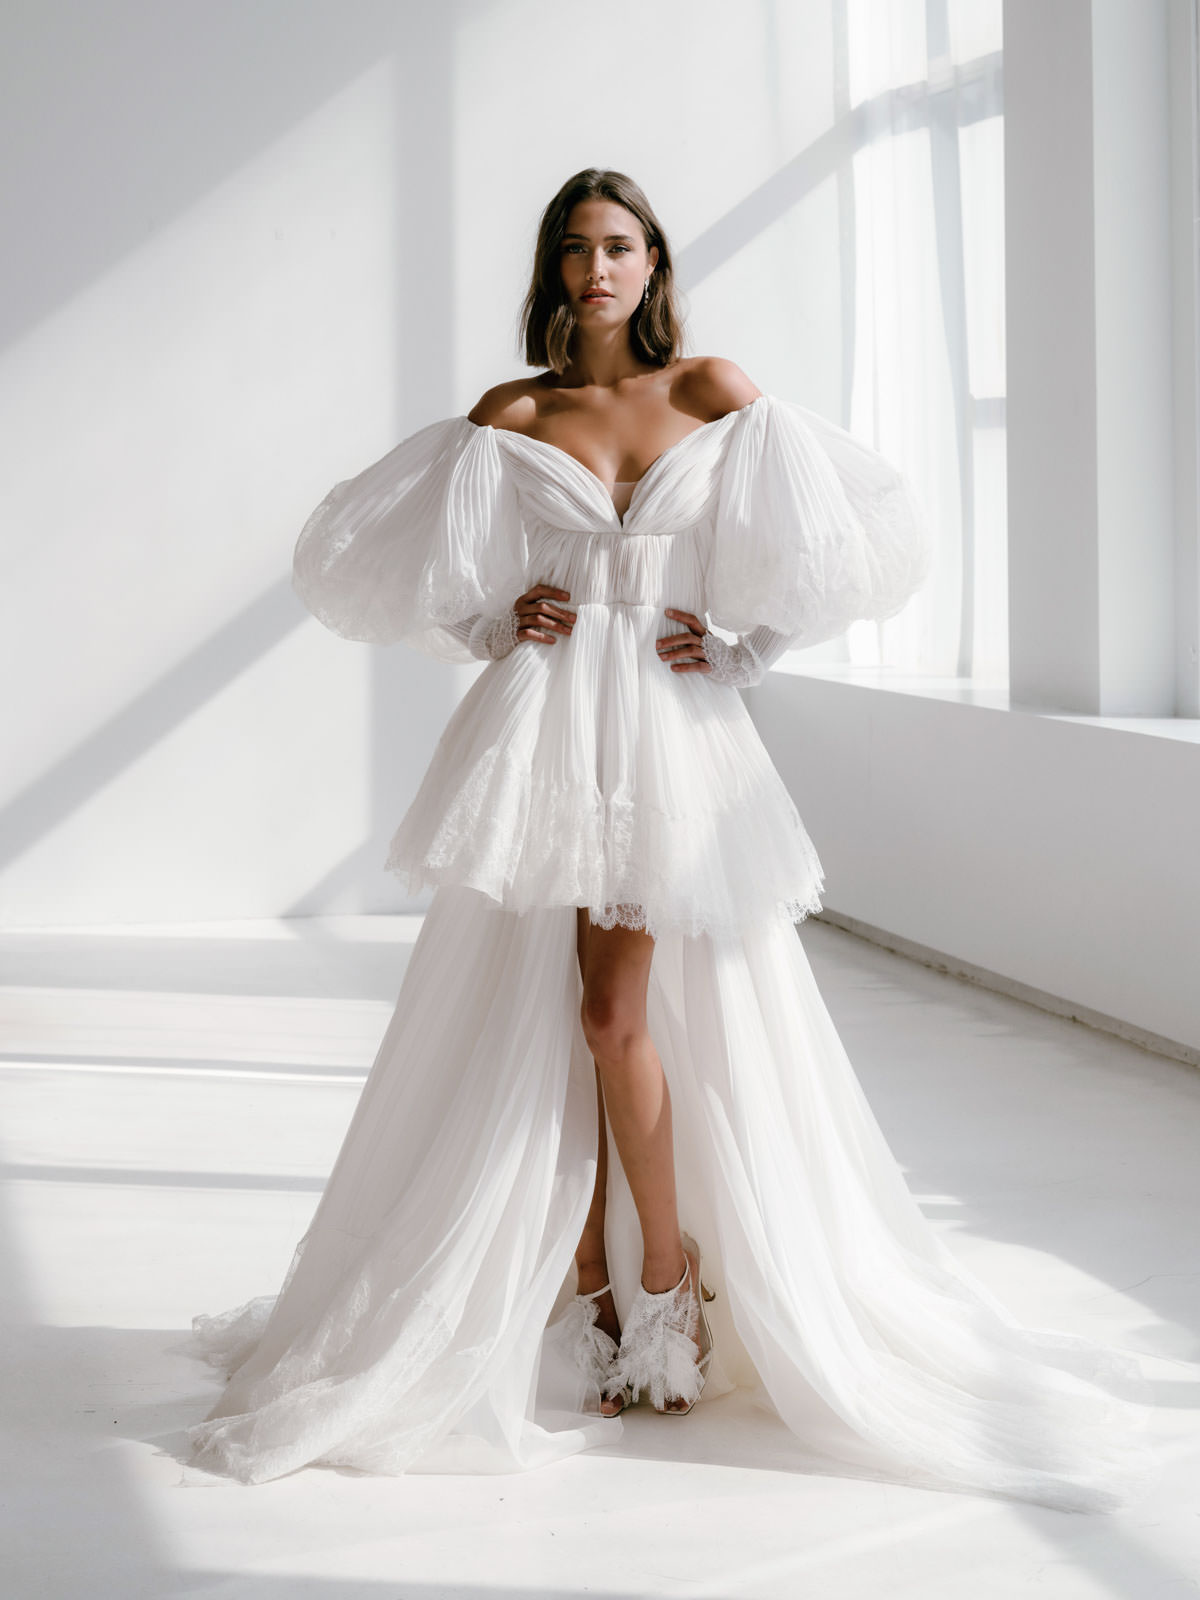 Editorial photo of a model wearing a wedding dress at the New York Bridal Fashion Week. Image by Jenny Fu Studio